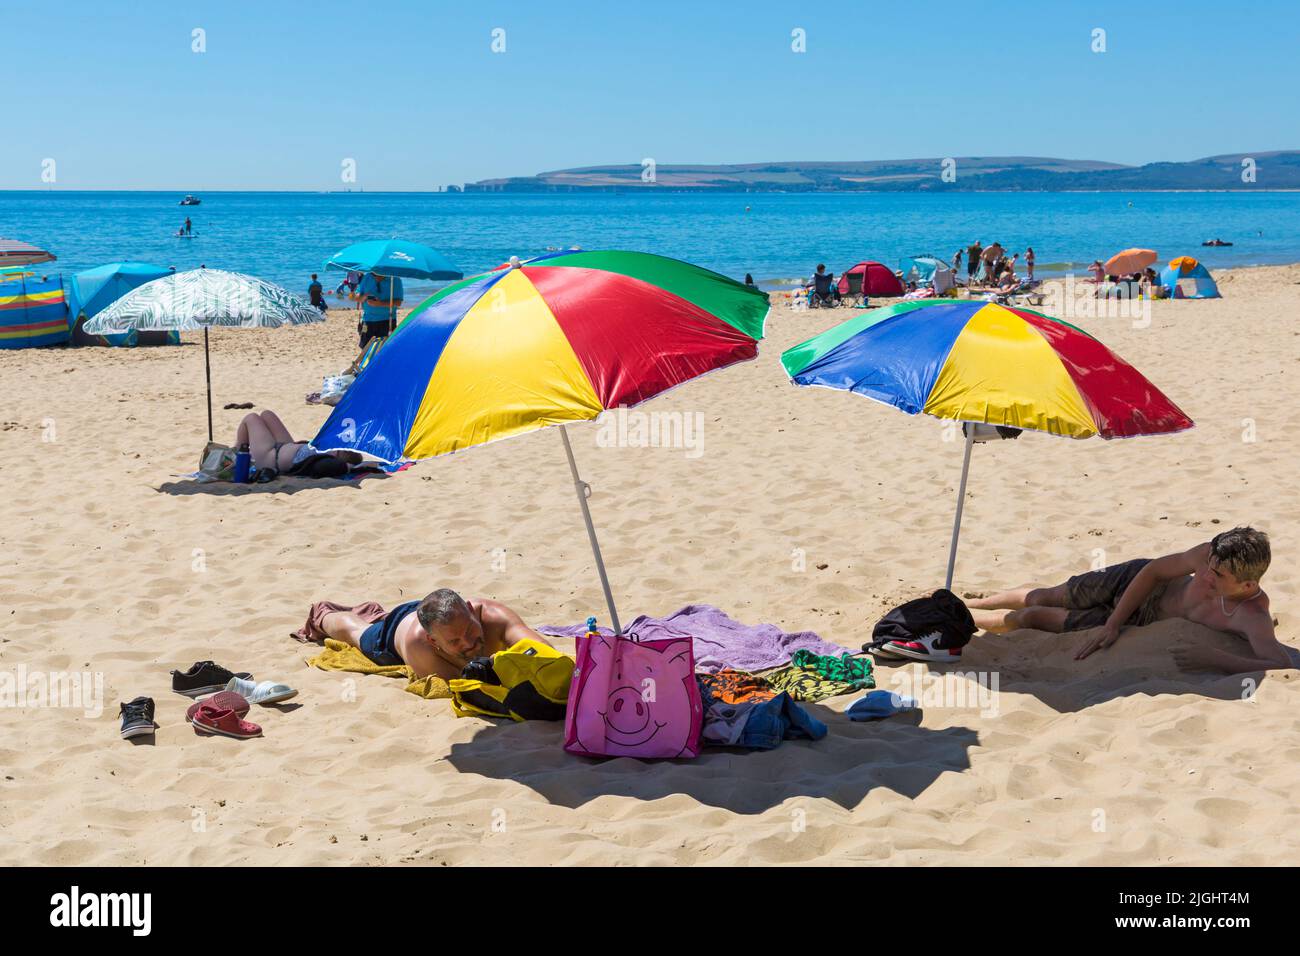 Bournemouth, Dorset UK. 11th July 2022. UK weather: hot and sunny at Bournemouth beaches as beachgoers head to the seaside to enjoy the sun. Credit: Carolyn Jenkins/Alamy Live News Stock Photo